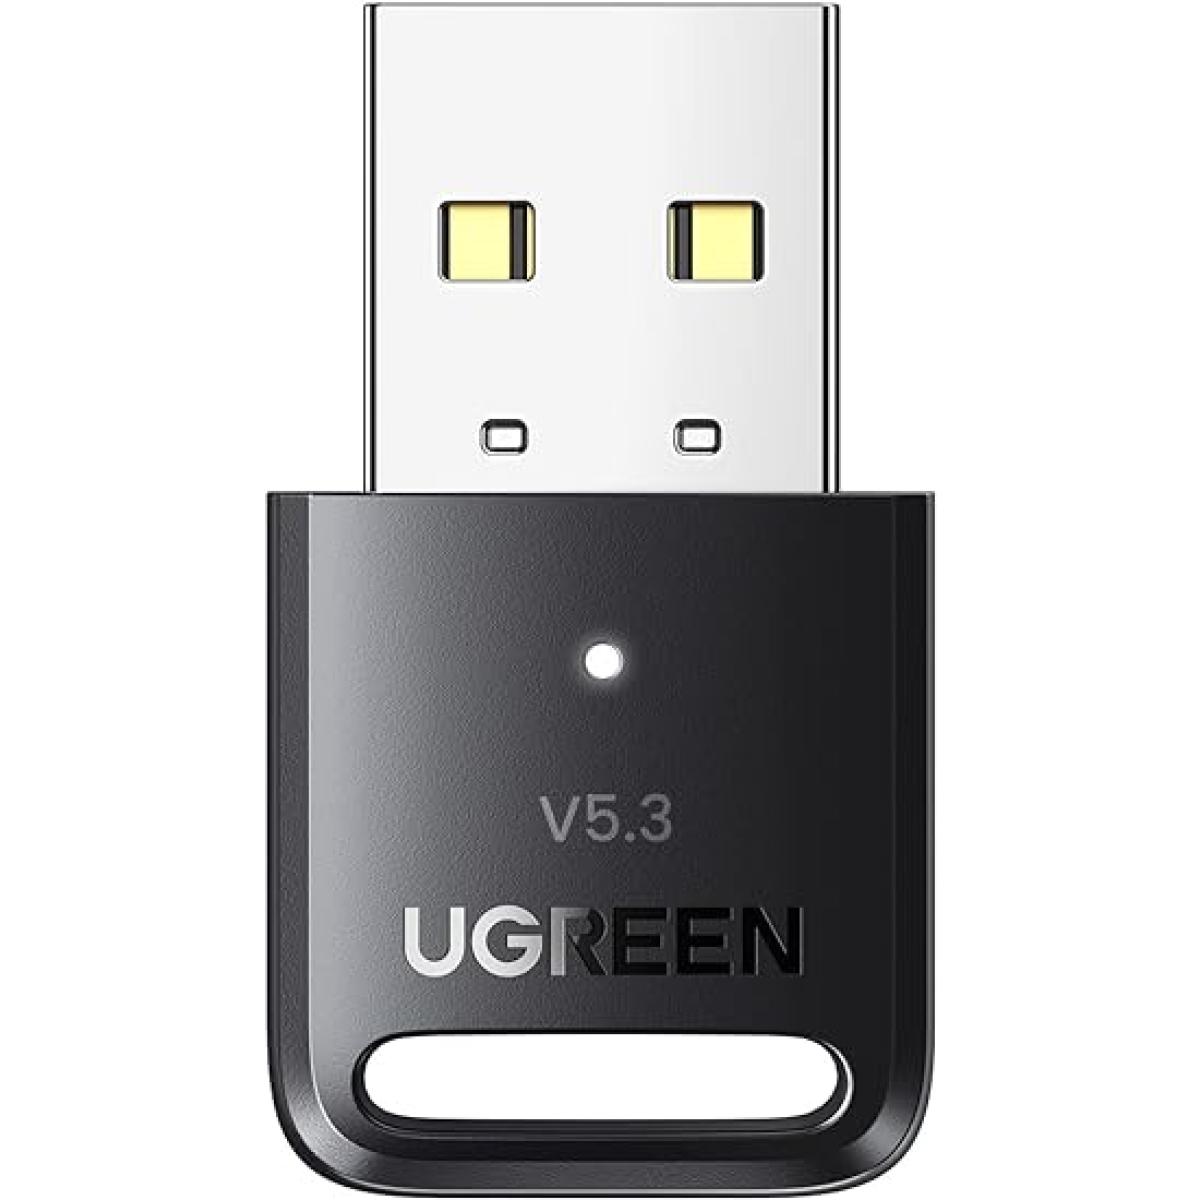 Ugreen V5.3 USB Bluetooth Adapter for PC Laptop, Plug and for